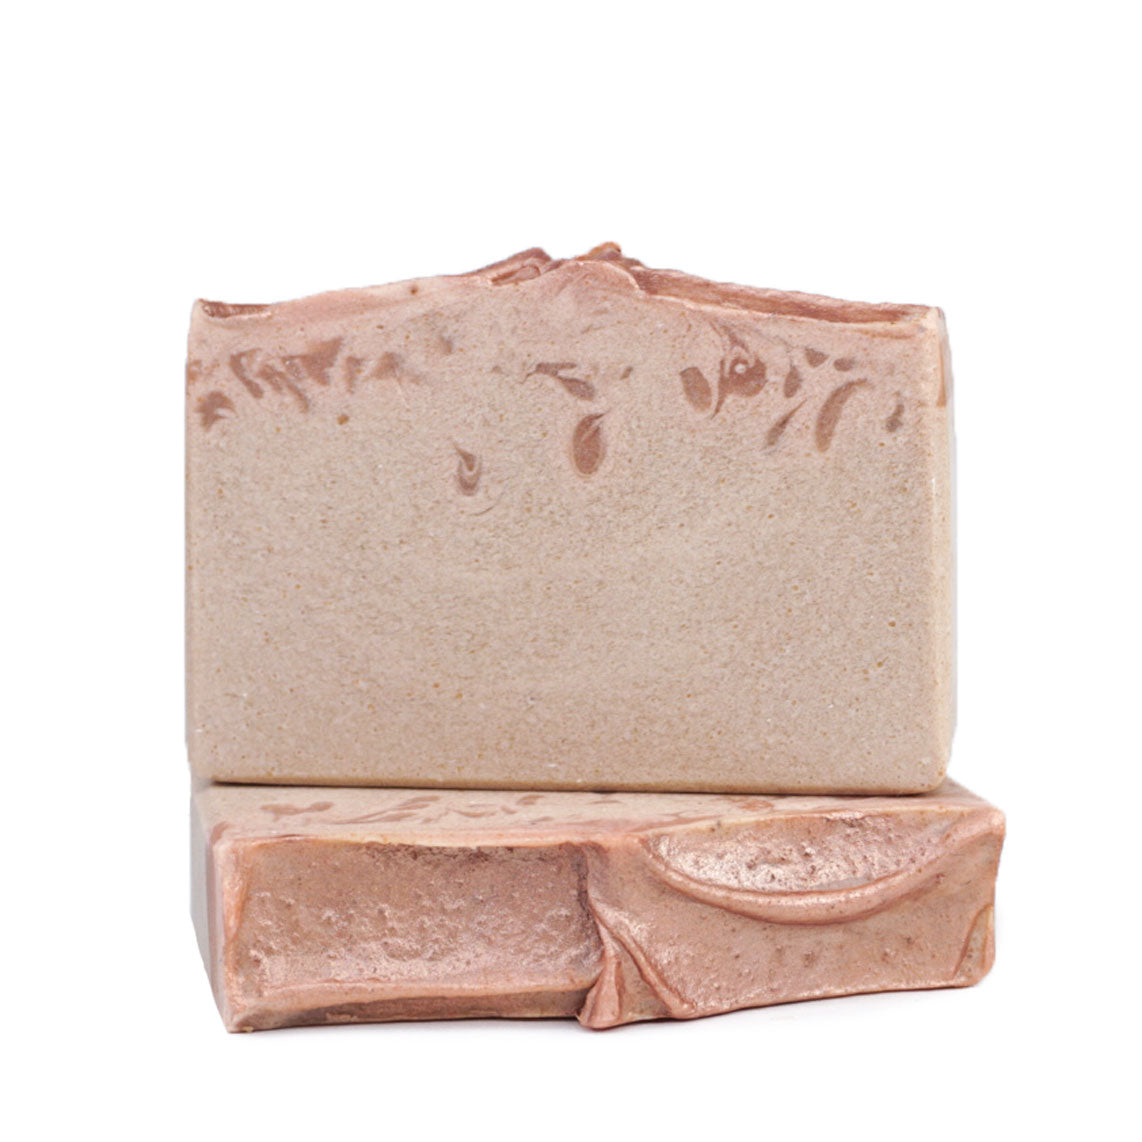 two bar soaps beige color with swirls